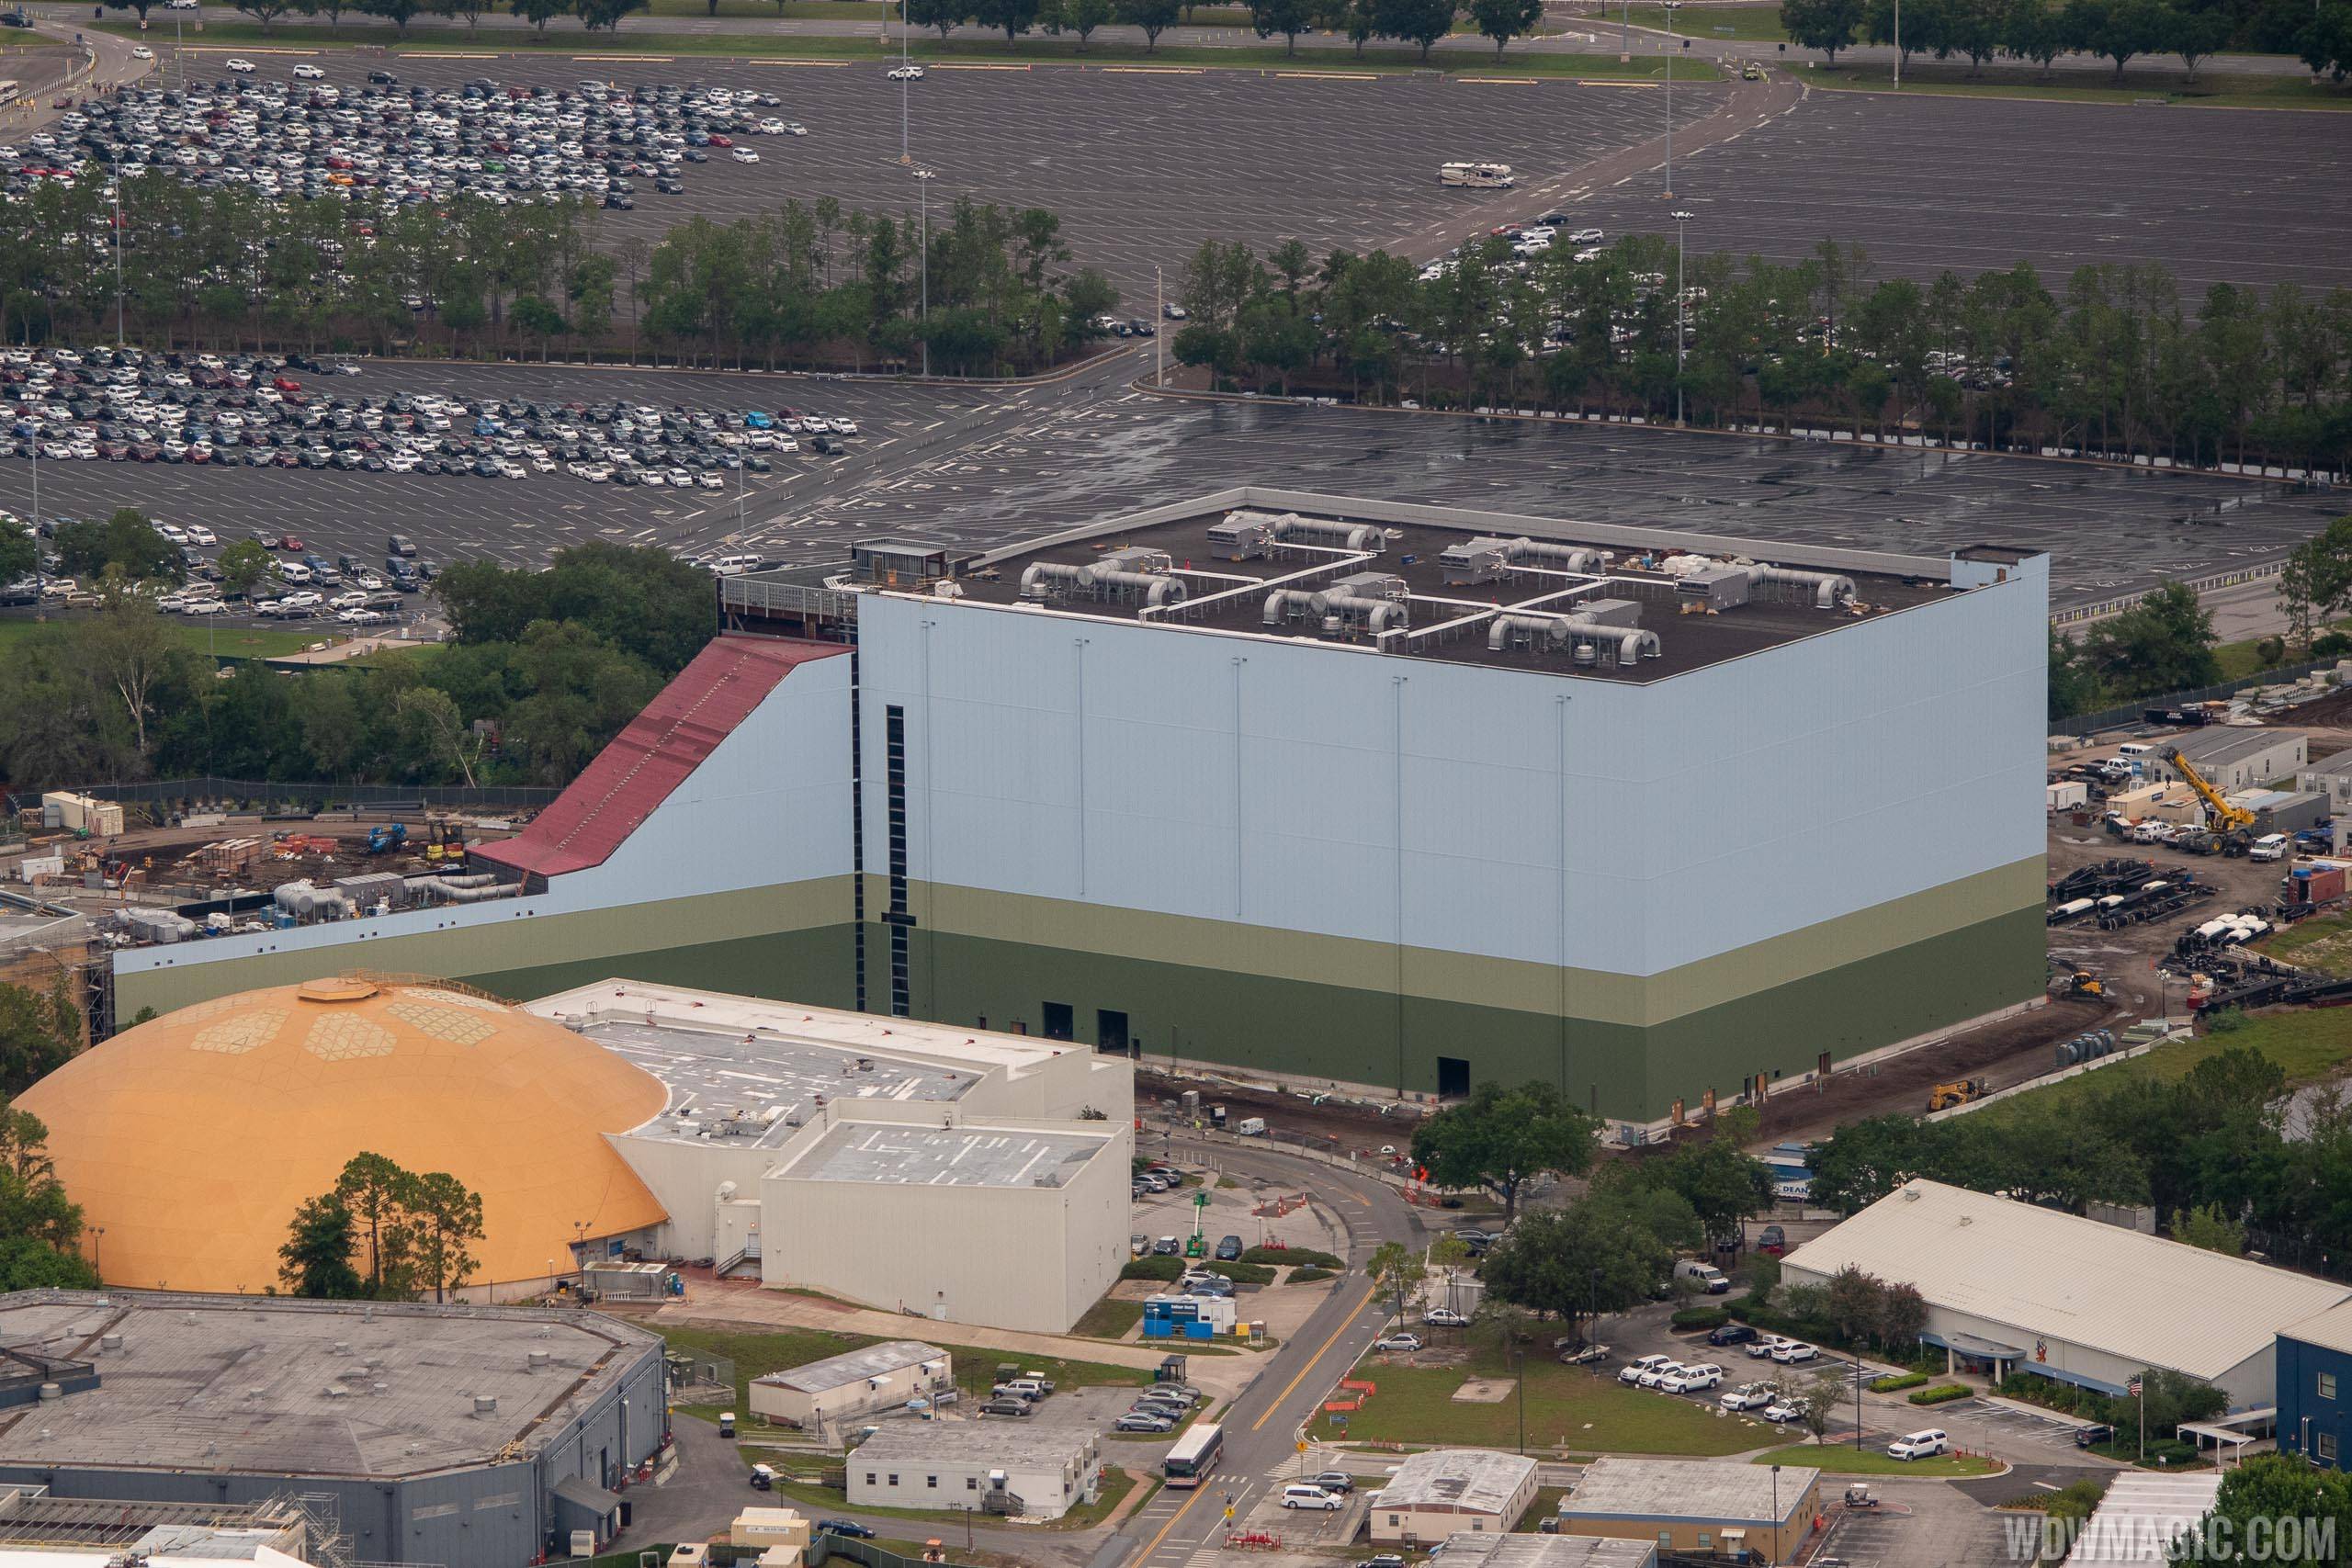 Guardians of the Galaxy construction - June 2019